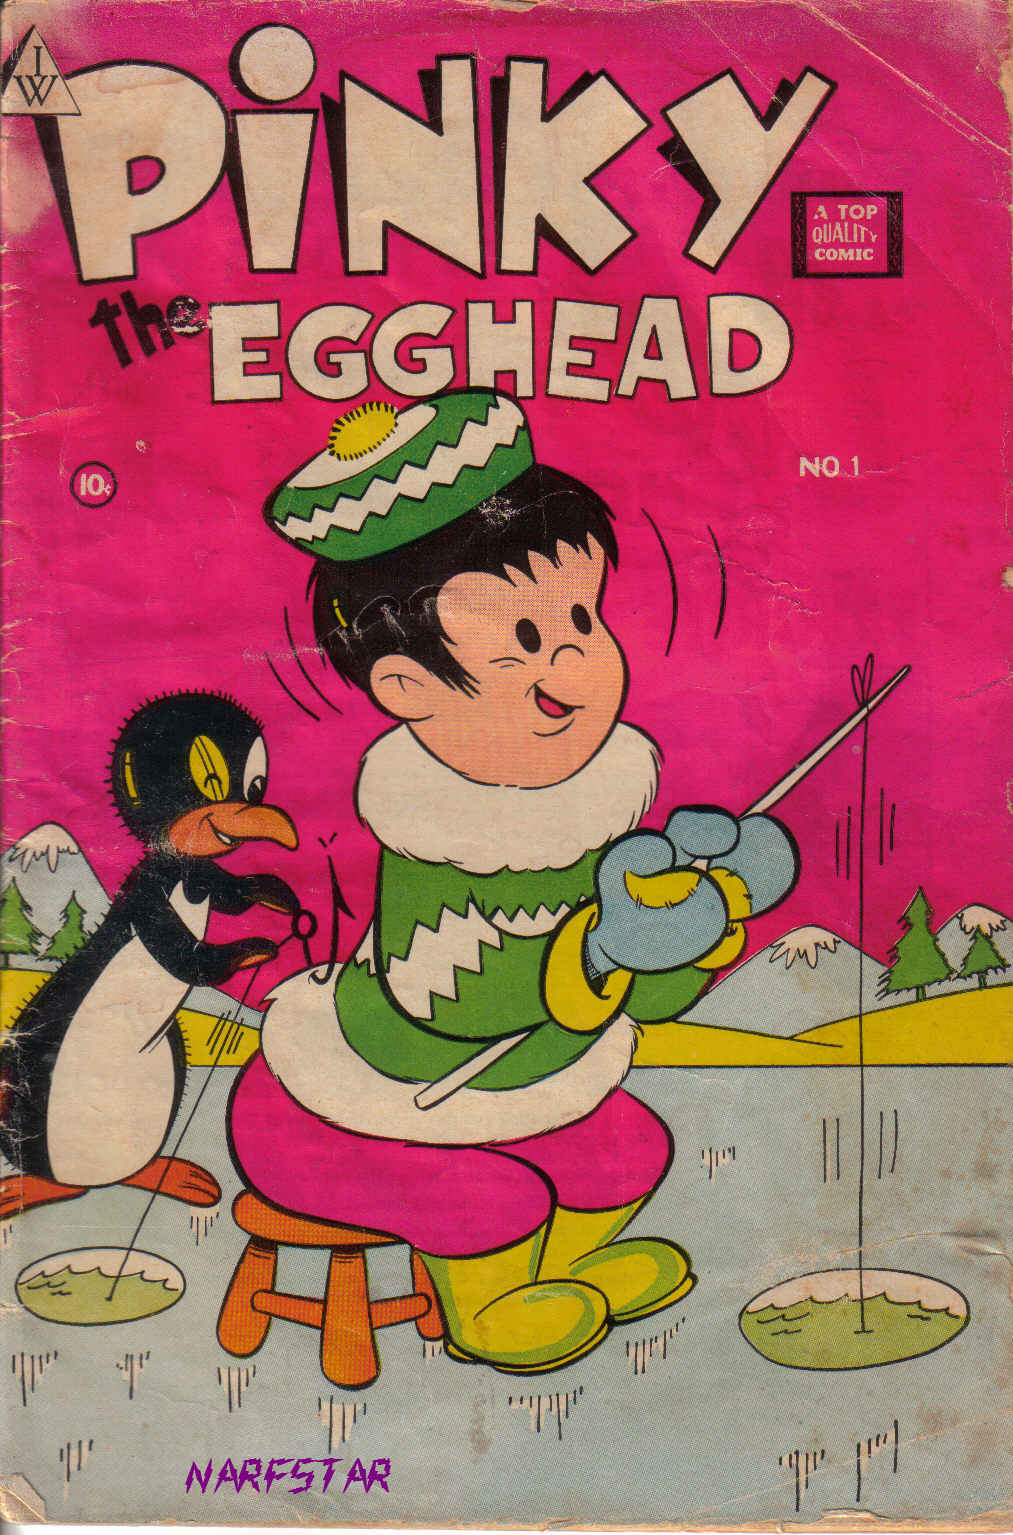 Book Cover For Pinky the Egghead 1 - Version 1